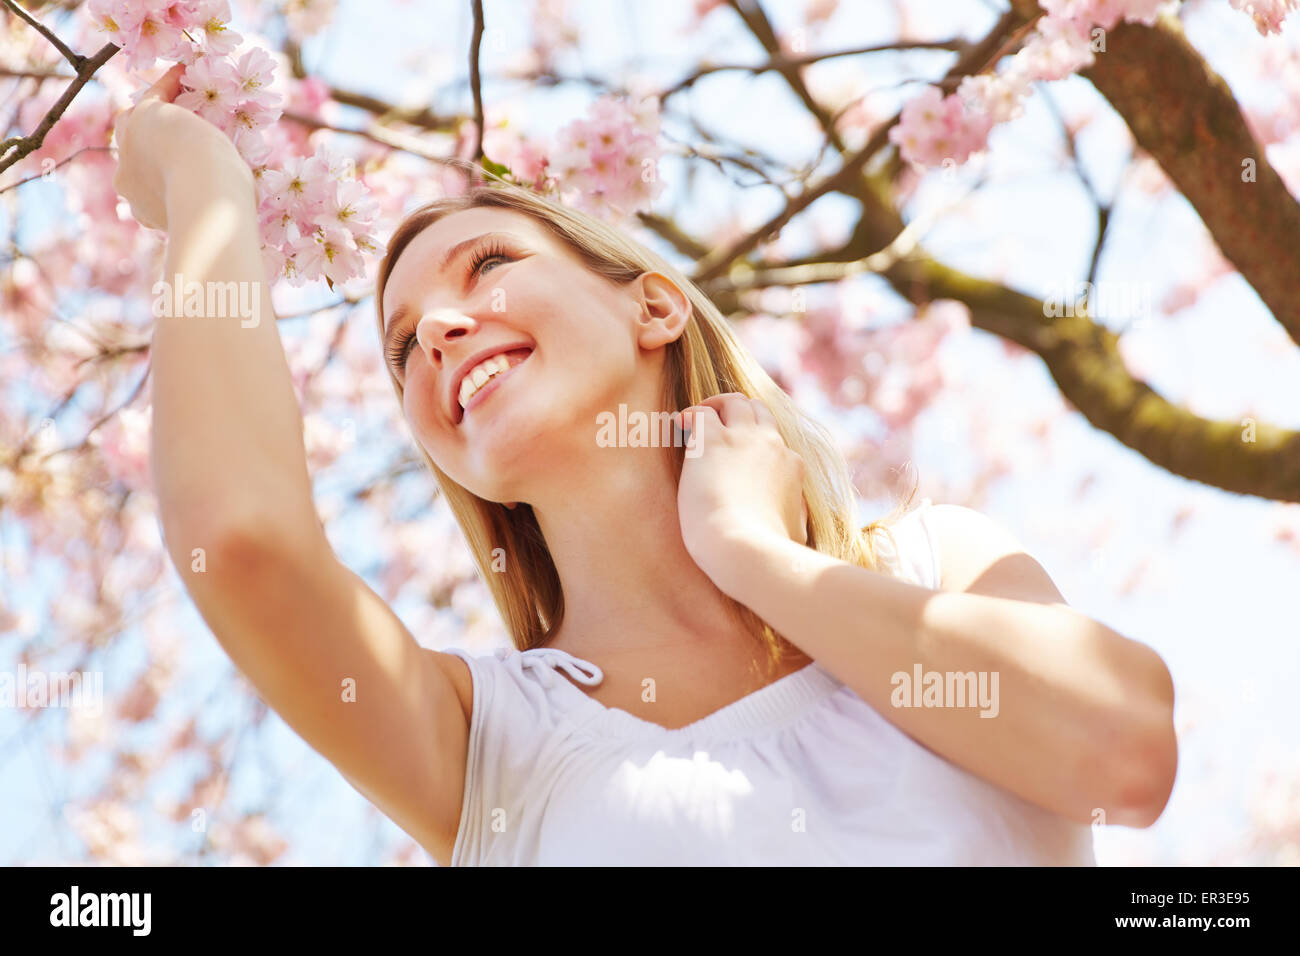 Blonde girl standing at cherry blossom in a garden under a blooming tree Stock Photo